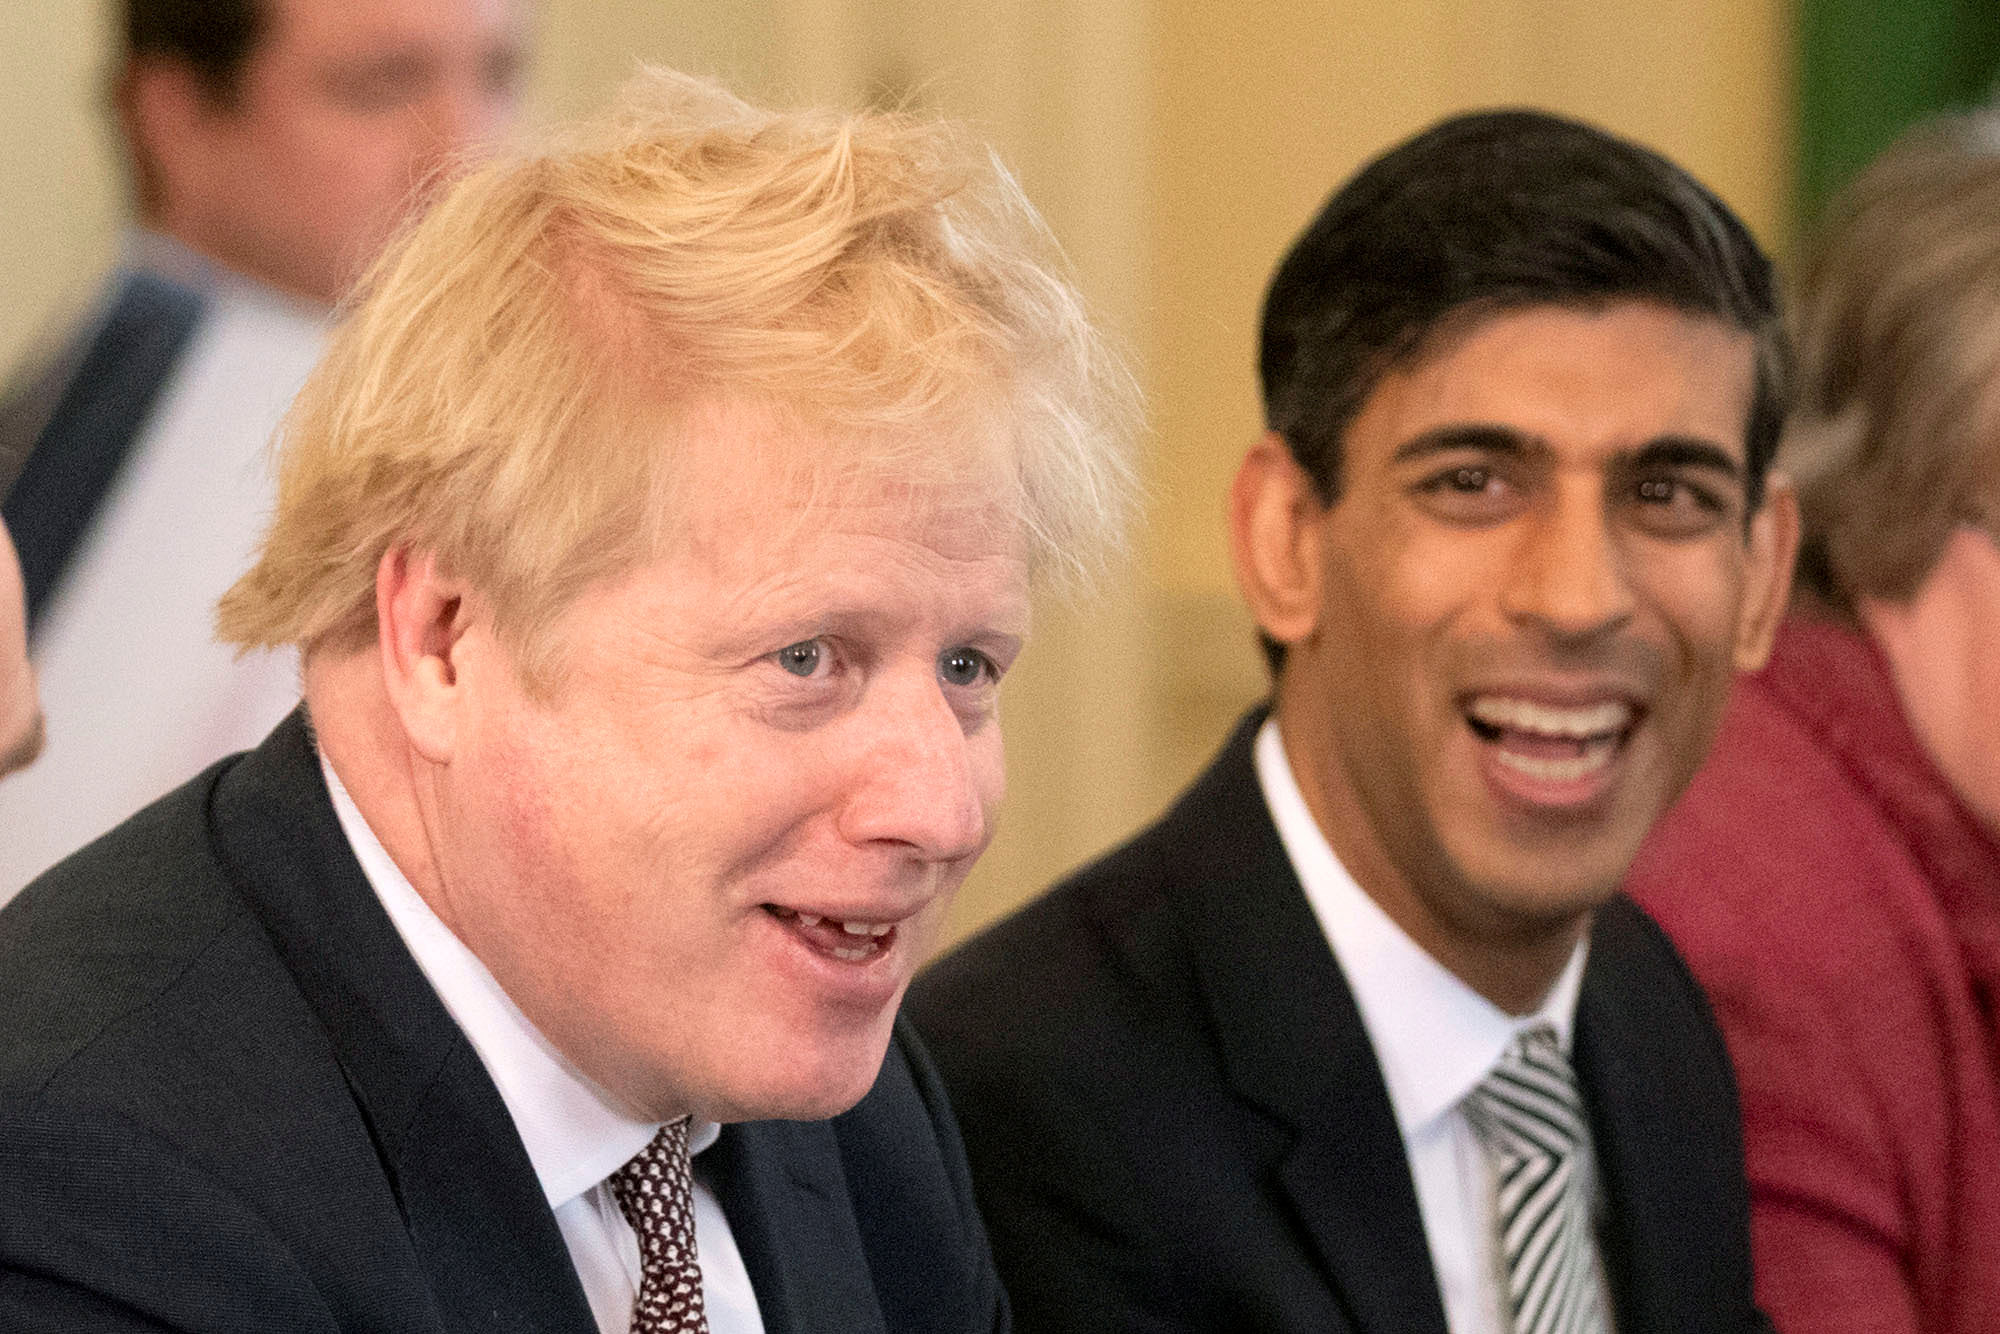 Britain's Prime Minister Boris Johnson speaks during his first Cabinet meeting next to a new appointed Chancellor of the Exchequer Rishi Sunak, following a reshuffle the day before, at Downing Street in London. (Reuters file photo)